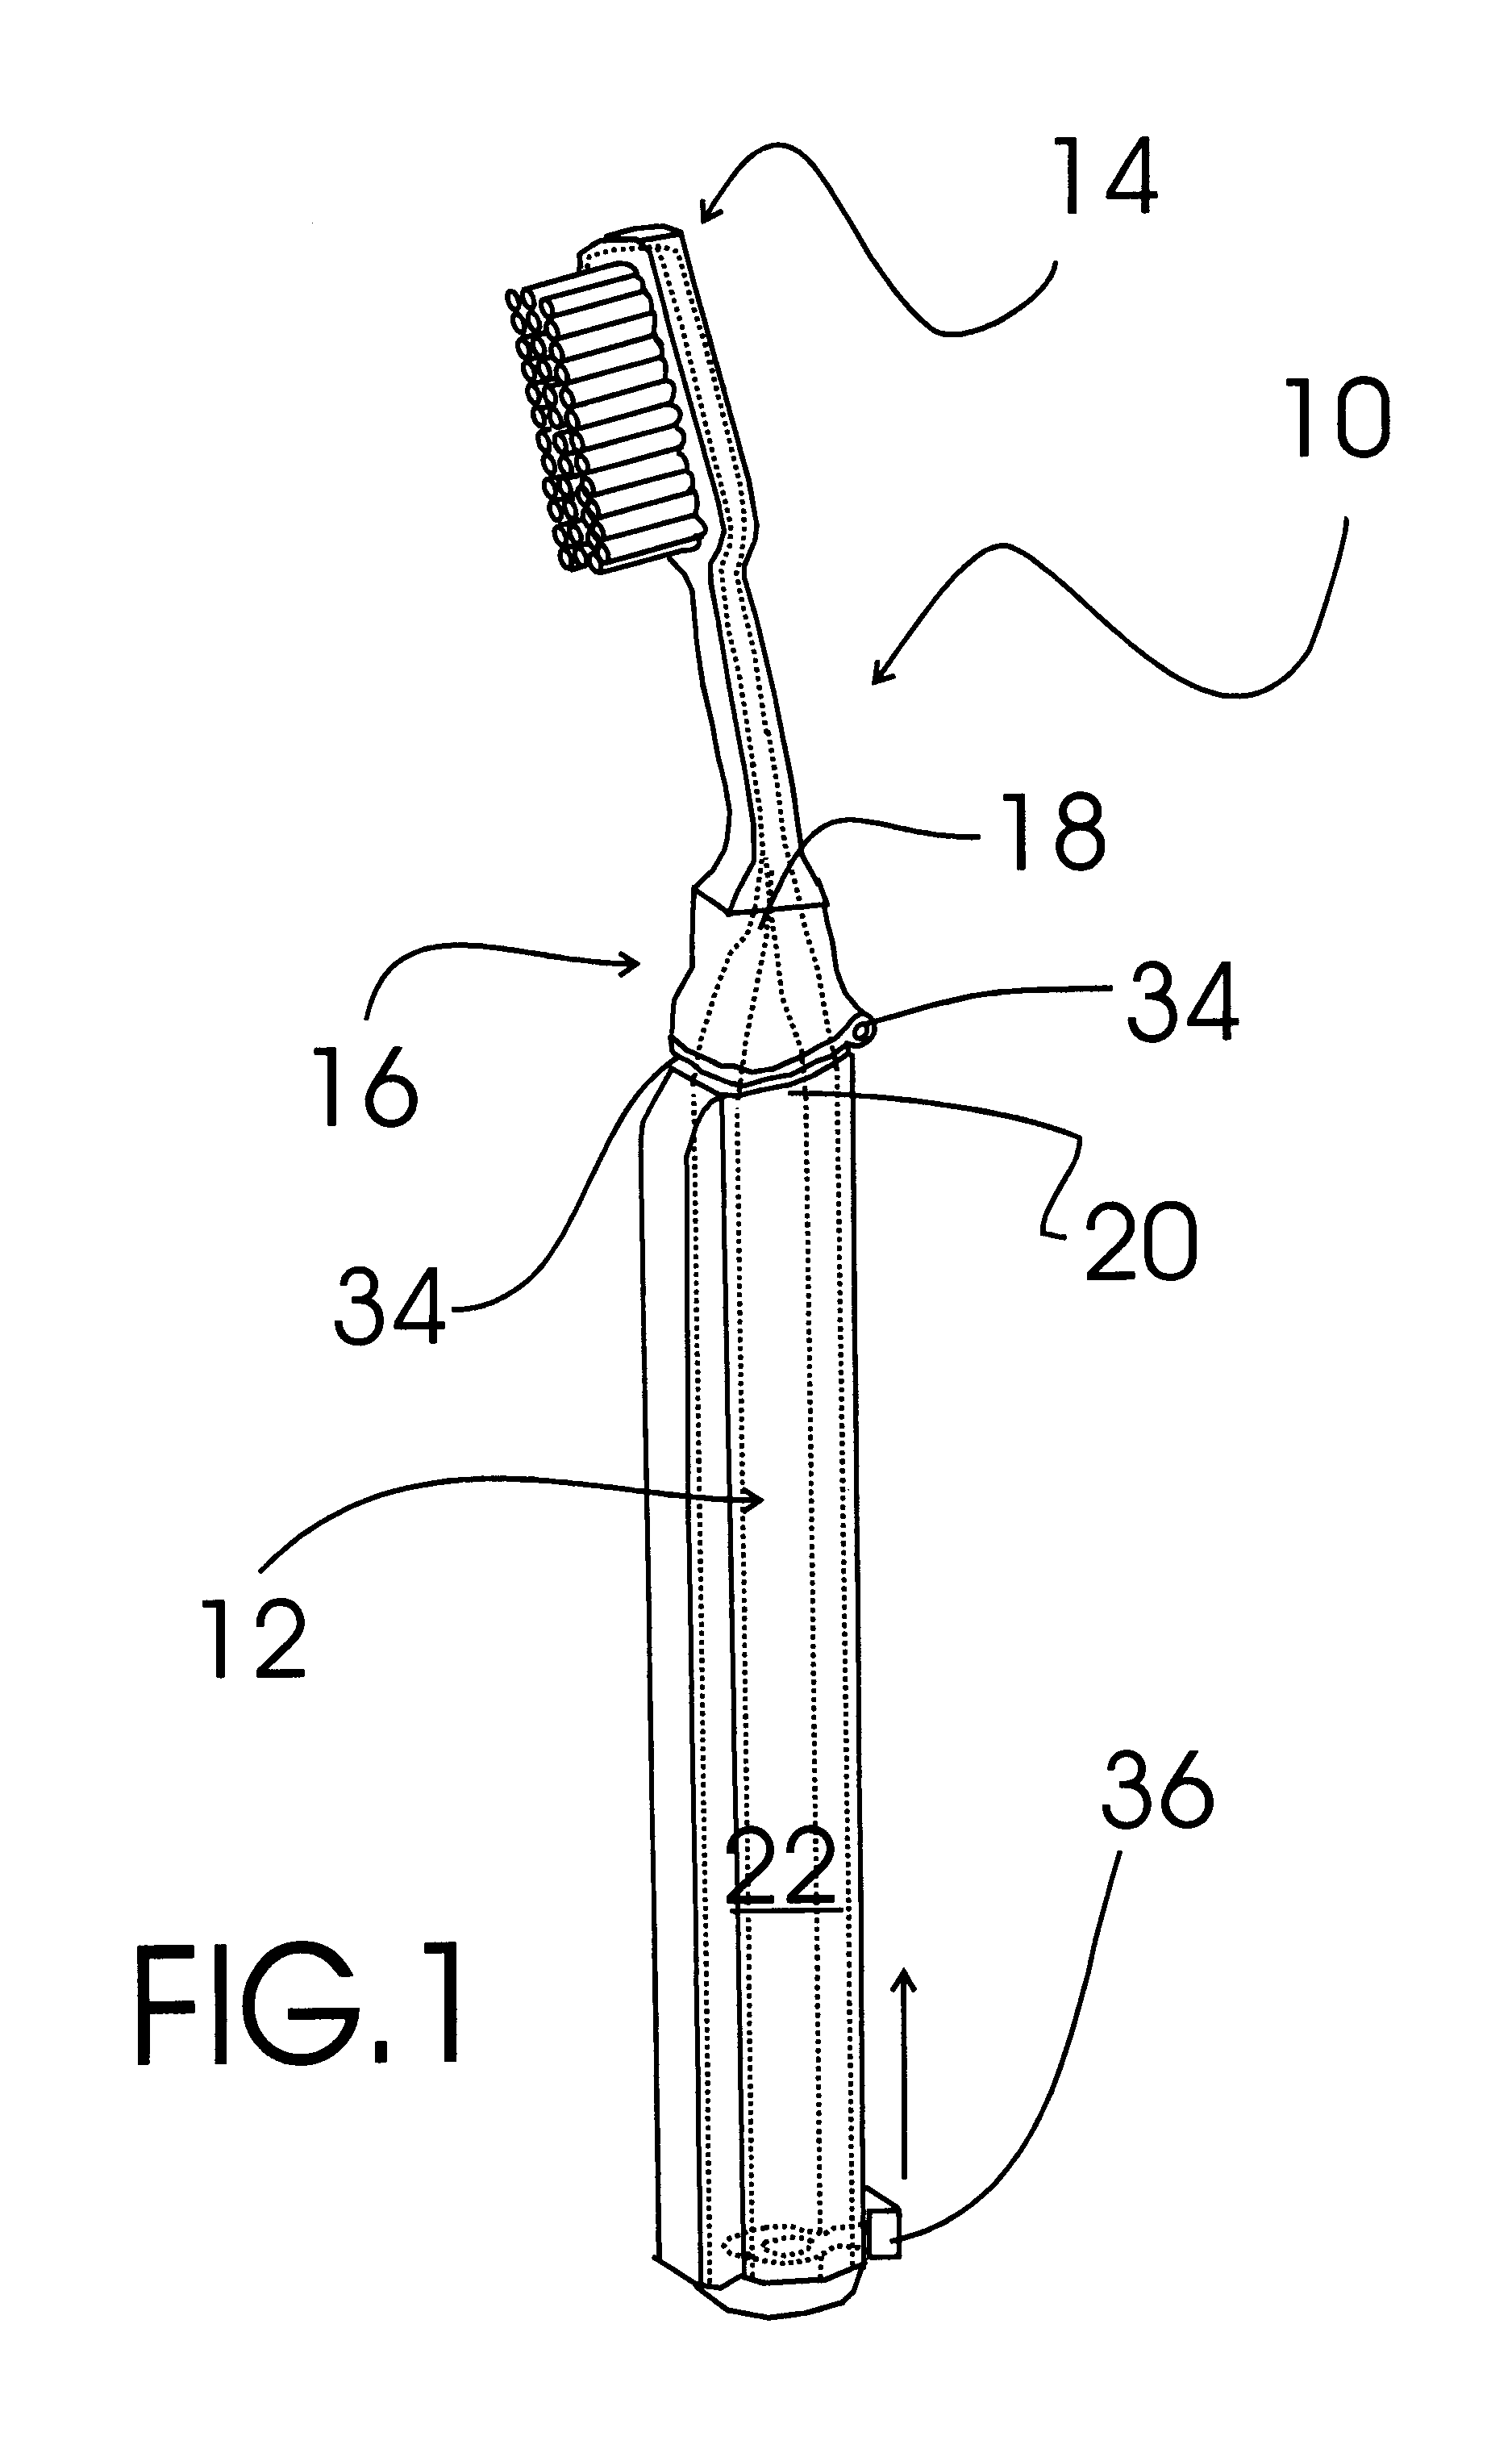 Toothbrush with toothpaste feed system